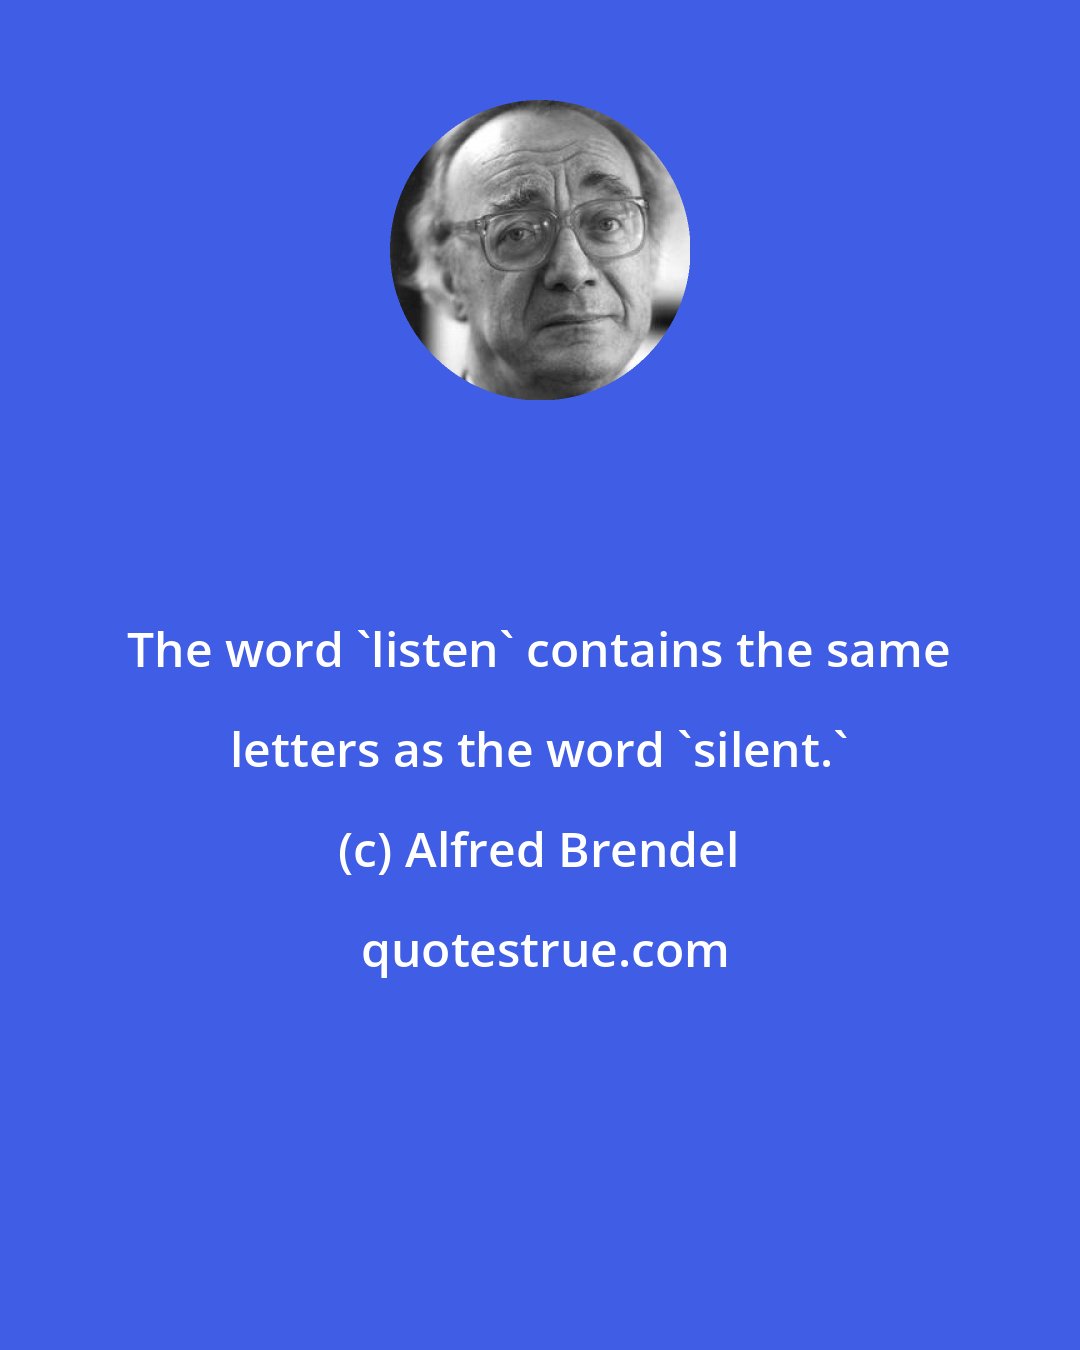 Alfred Brendel: The word 'listen' contains the same letters as the word 'silent.'